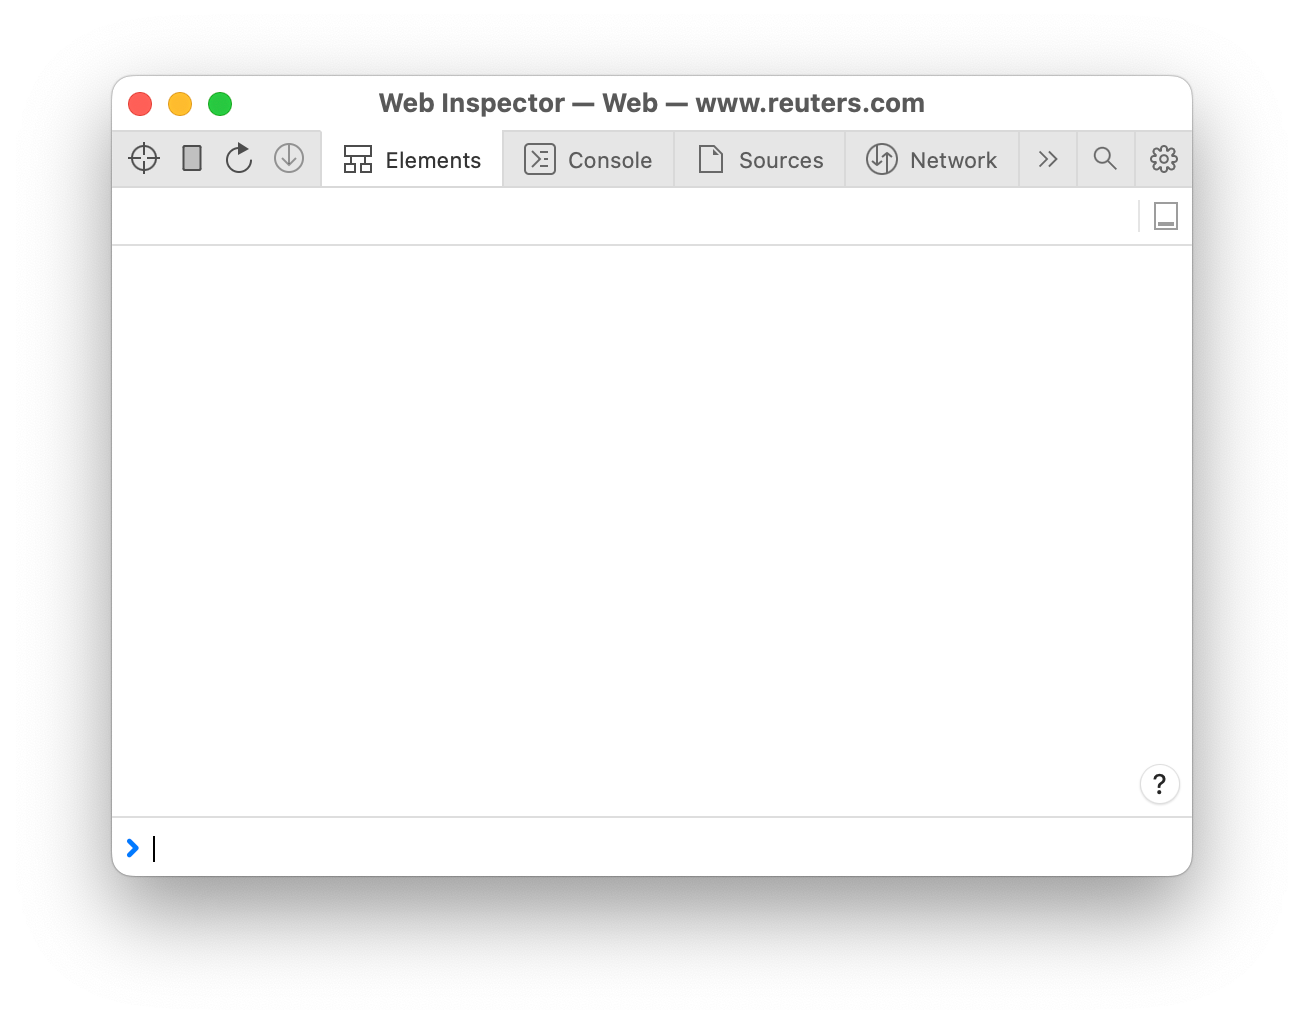 Safari's web inspector showing reuters.com being completely empty